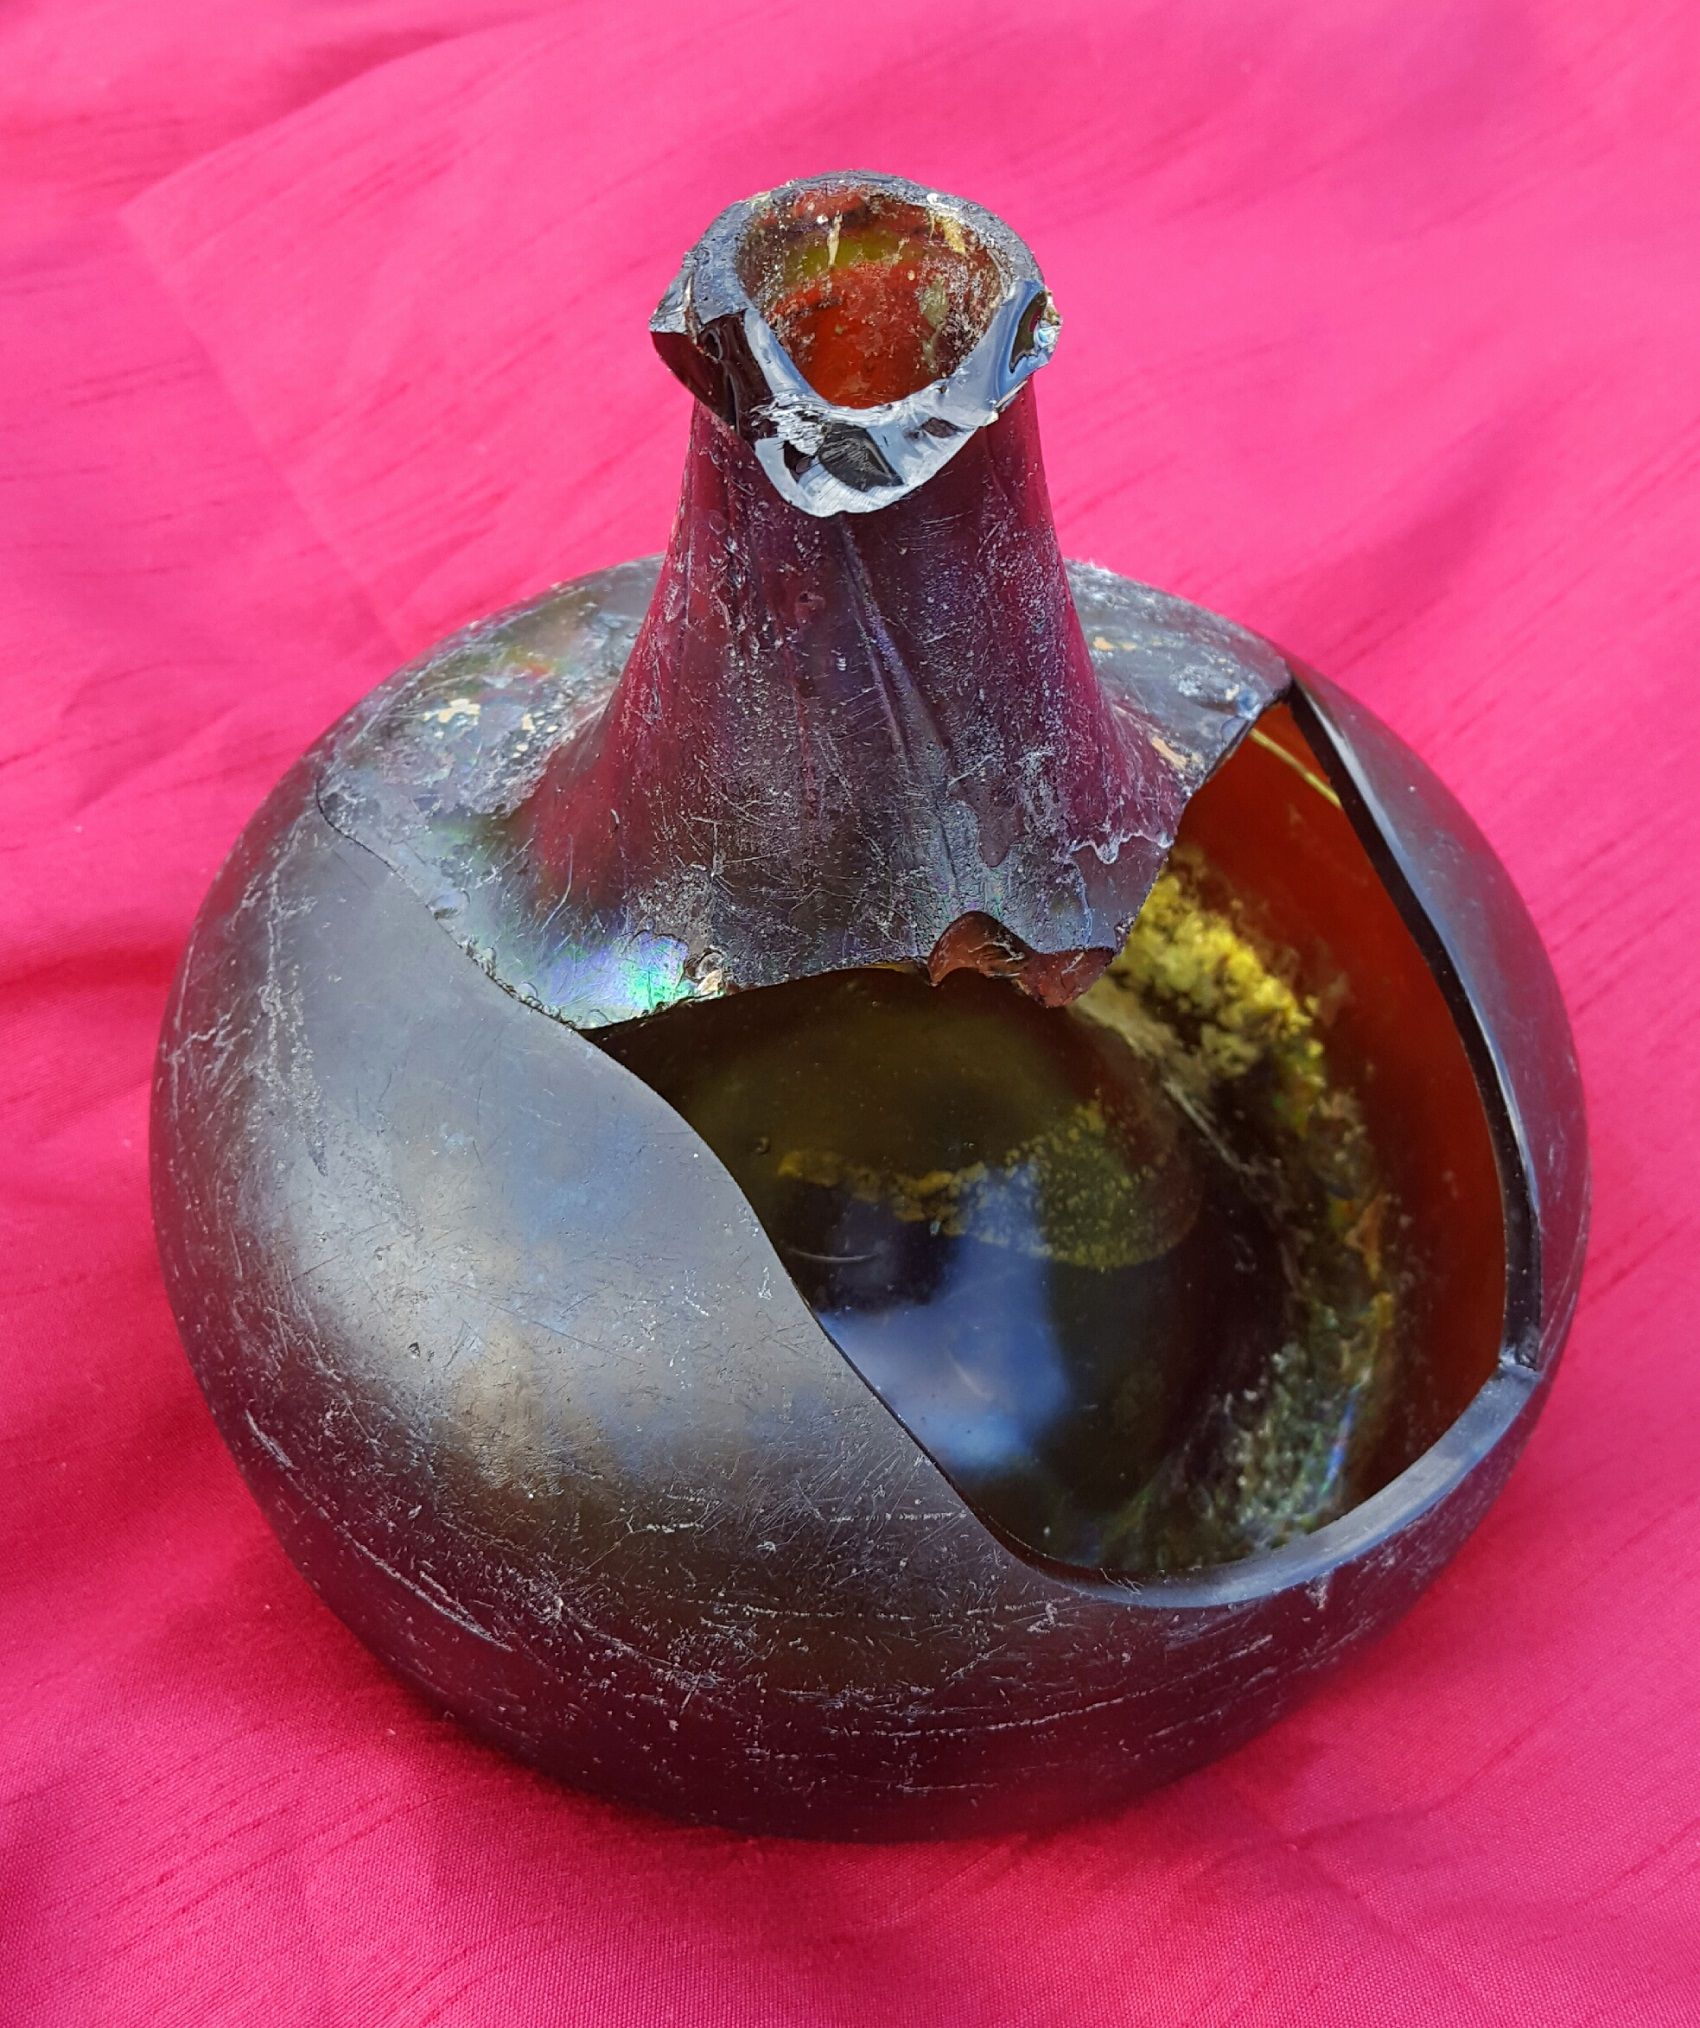 Reconstructed early 1700s black glass "onion" bottle